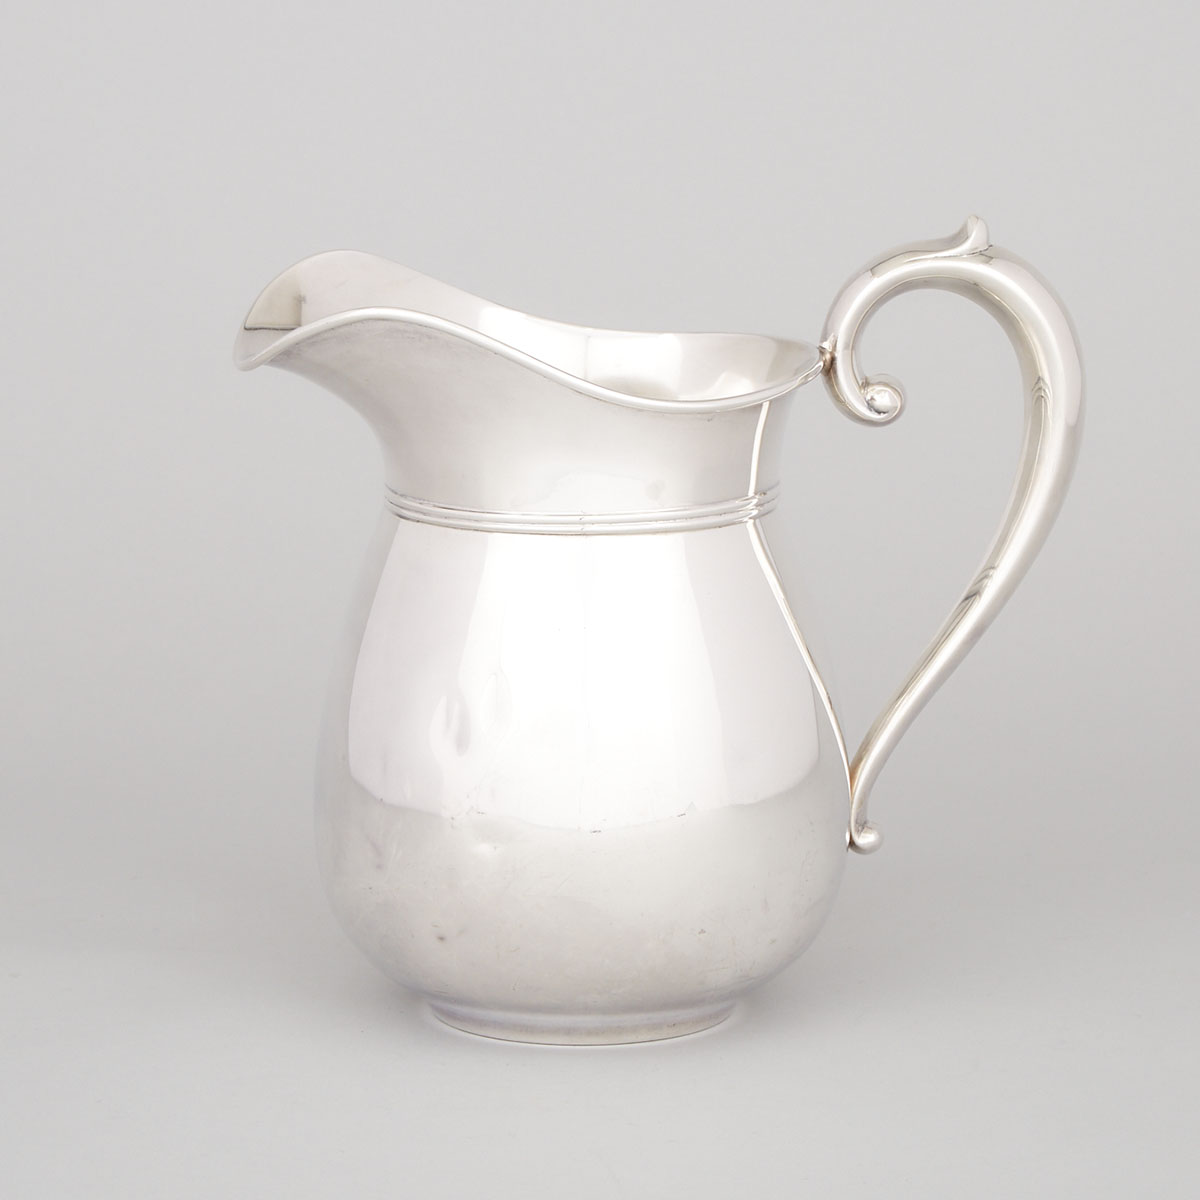 American Silver Water Pitcher, Manchester Silver Co., Providence, R.I., 20th century